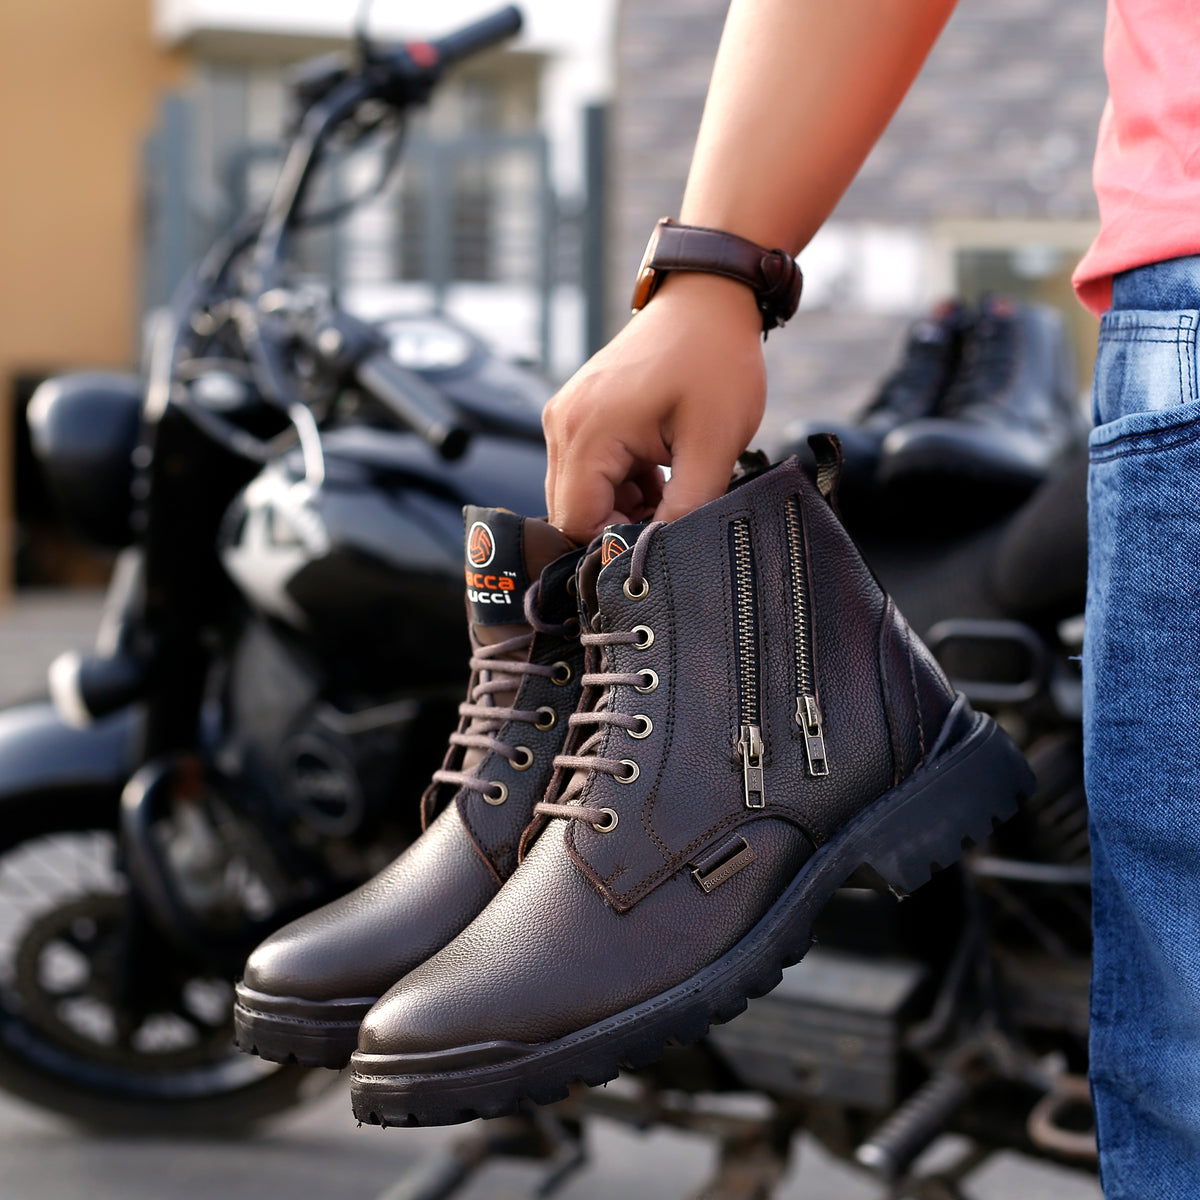 military boots, leather boots, leather boots for men, genuine leather boots 